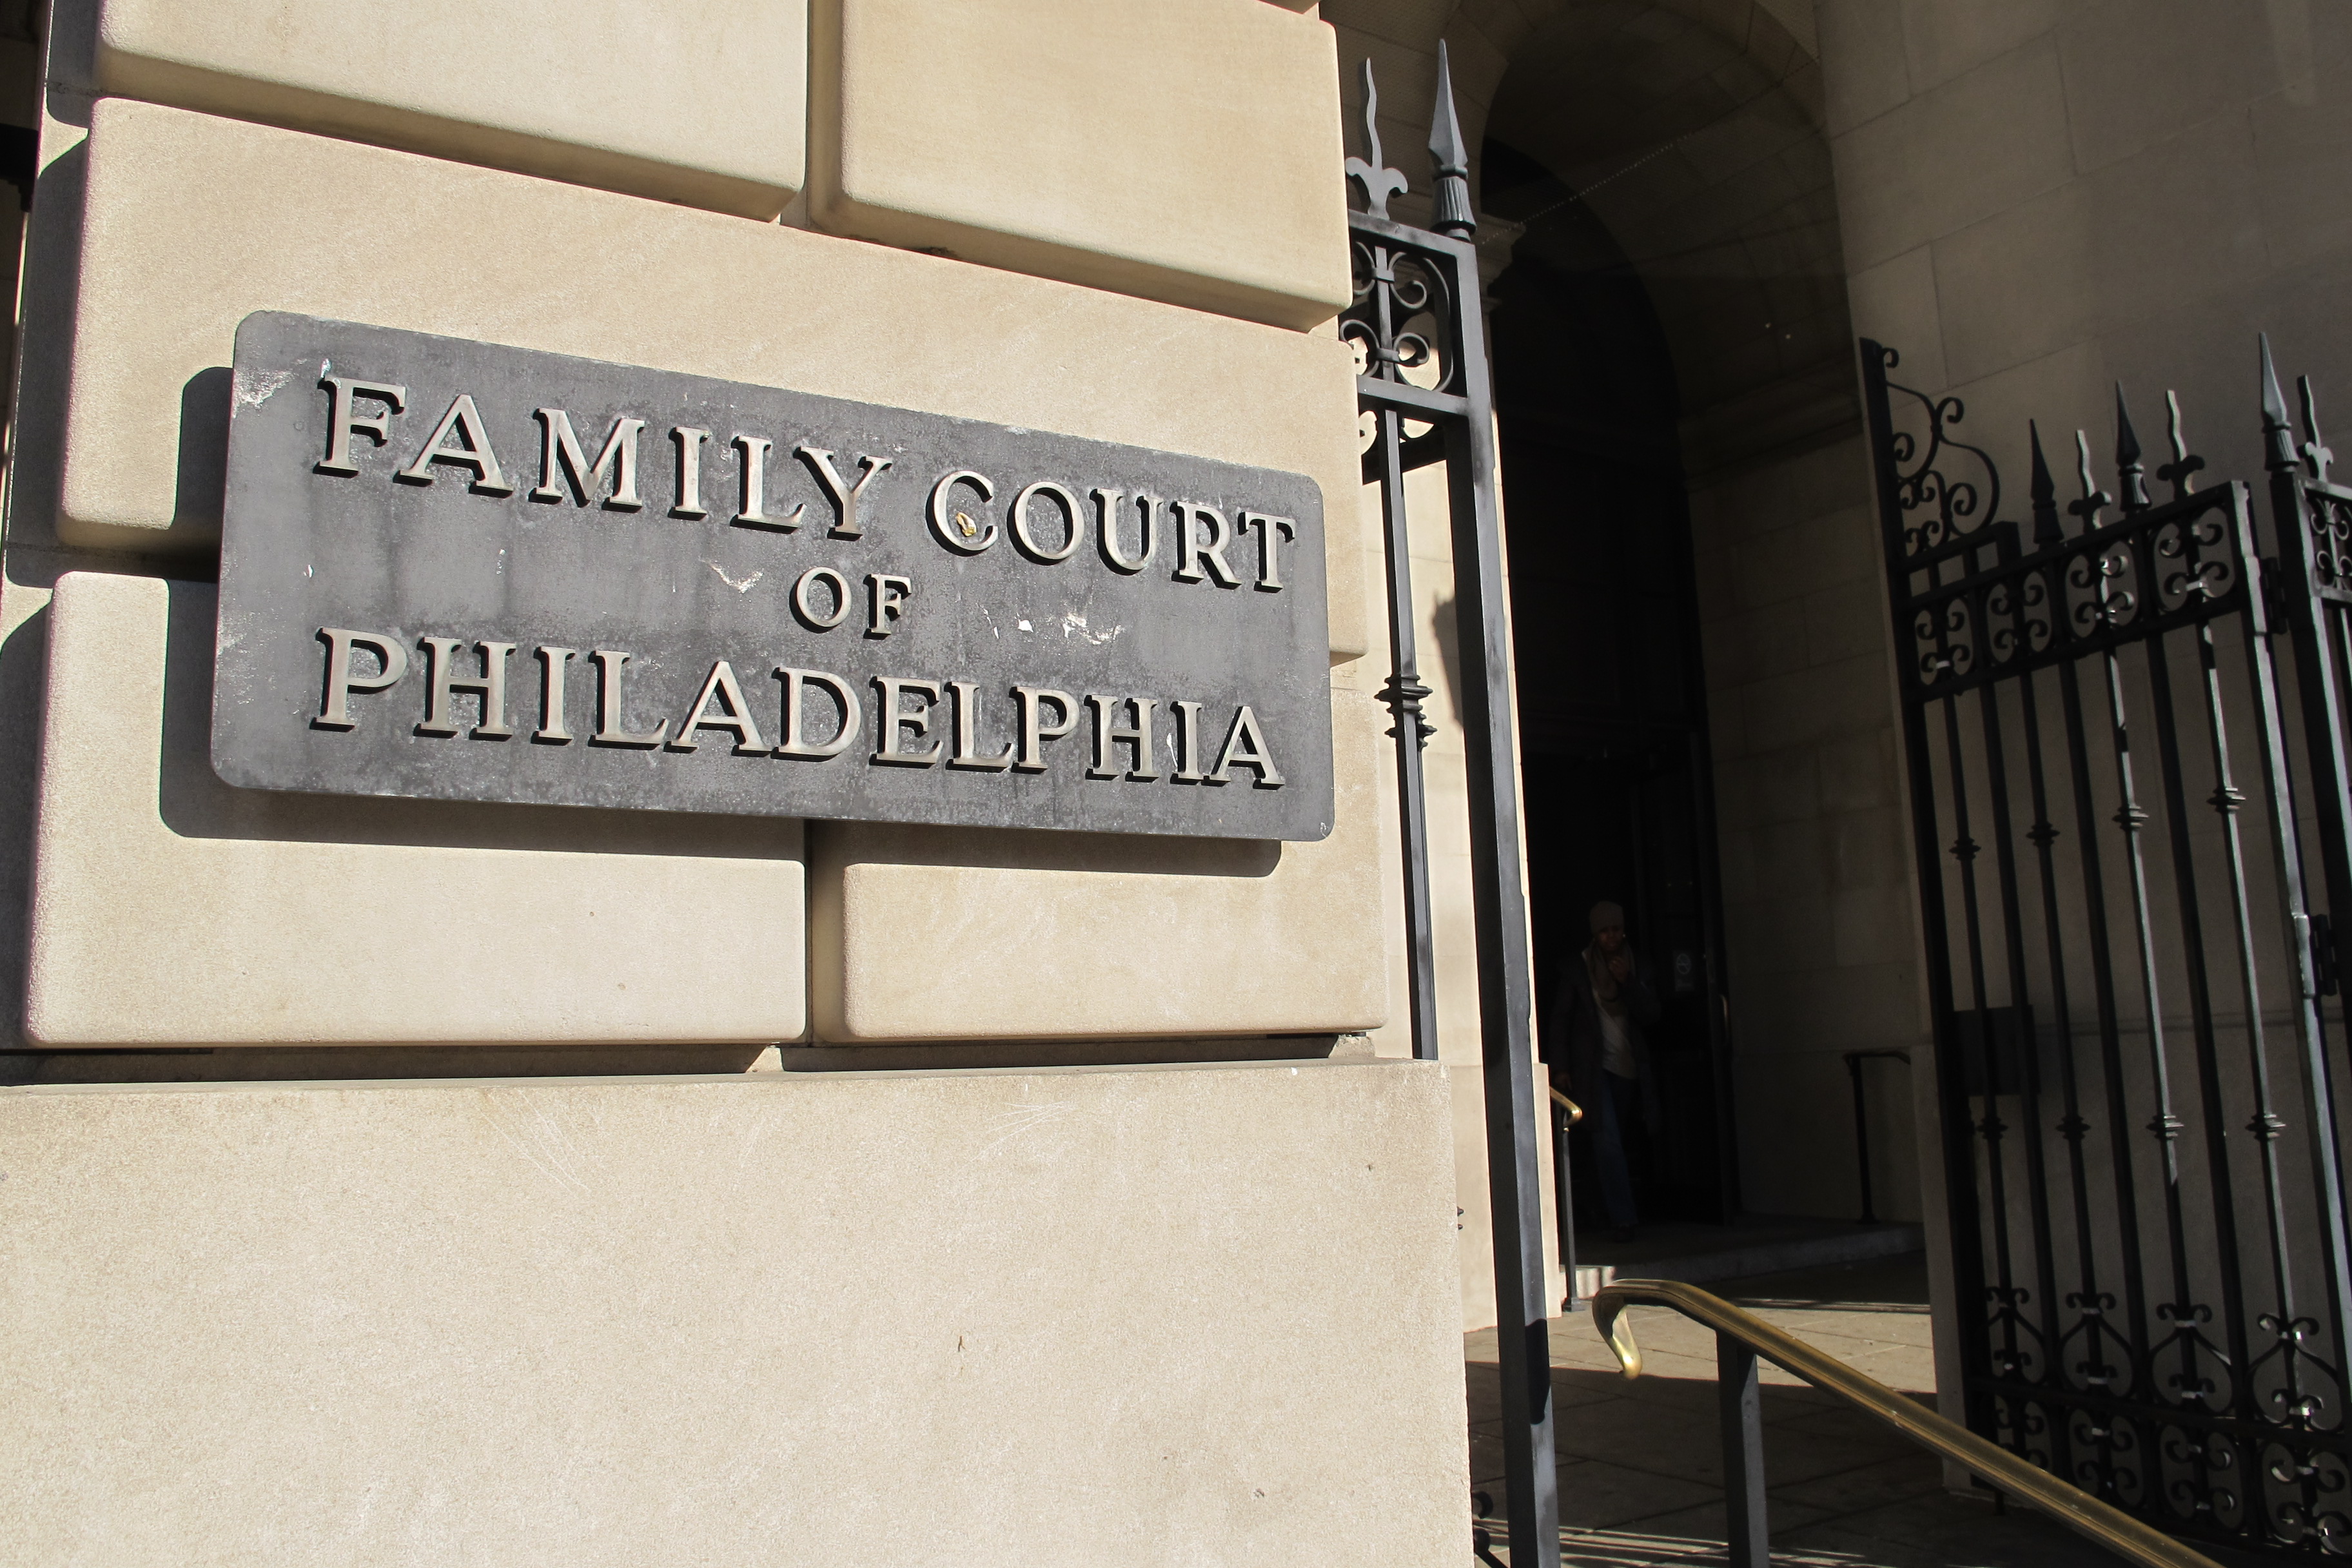 The Family Court of Philadelphia is moving to a new building under construction at 15th and Arch streets.